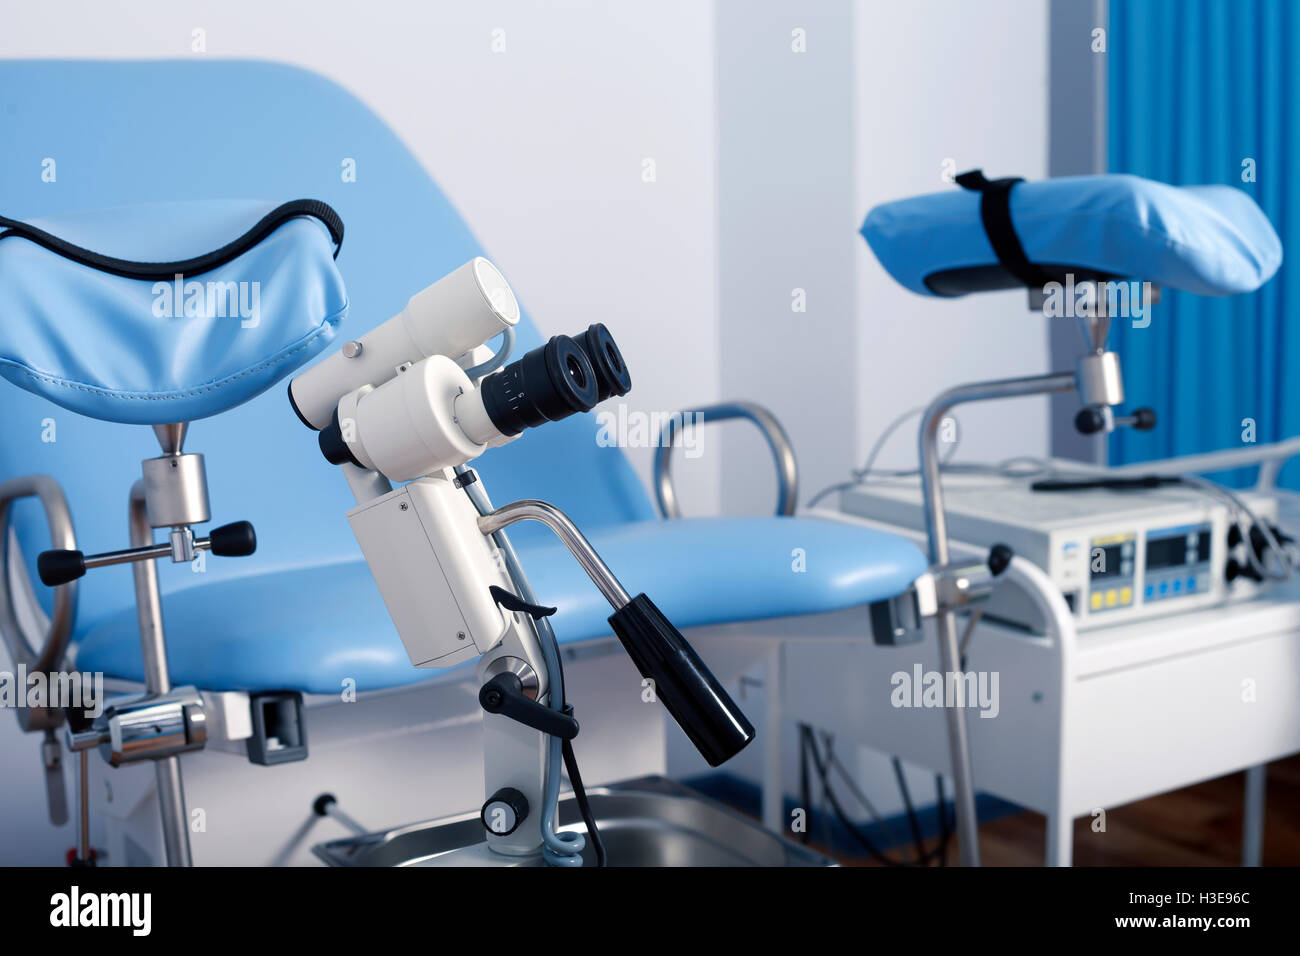 a medicine and health care, gynecological services and equipment Stock Photo